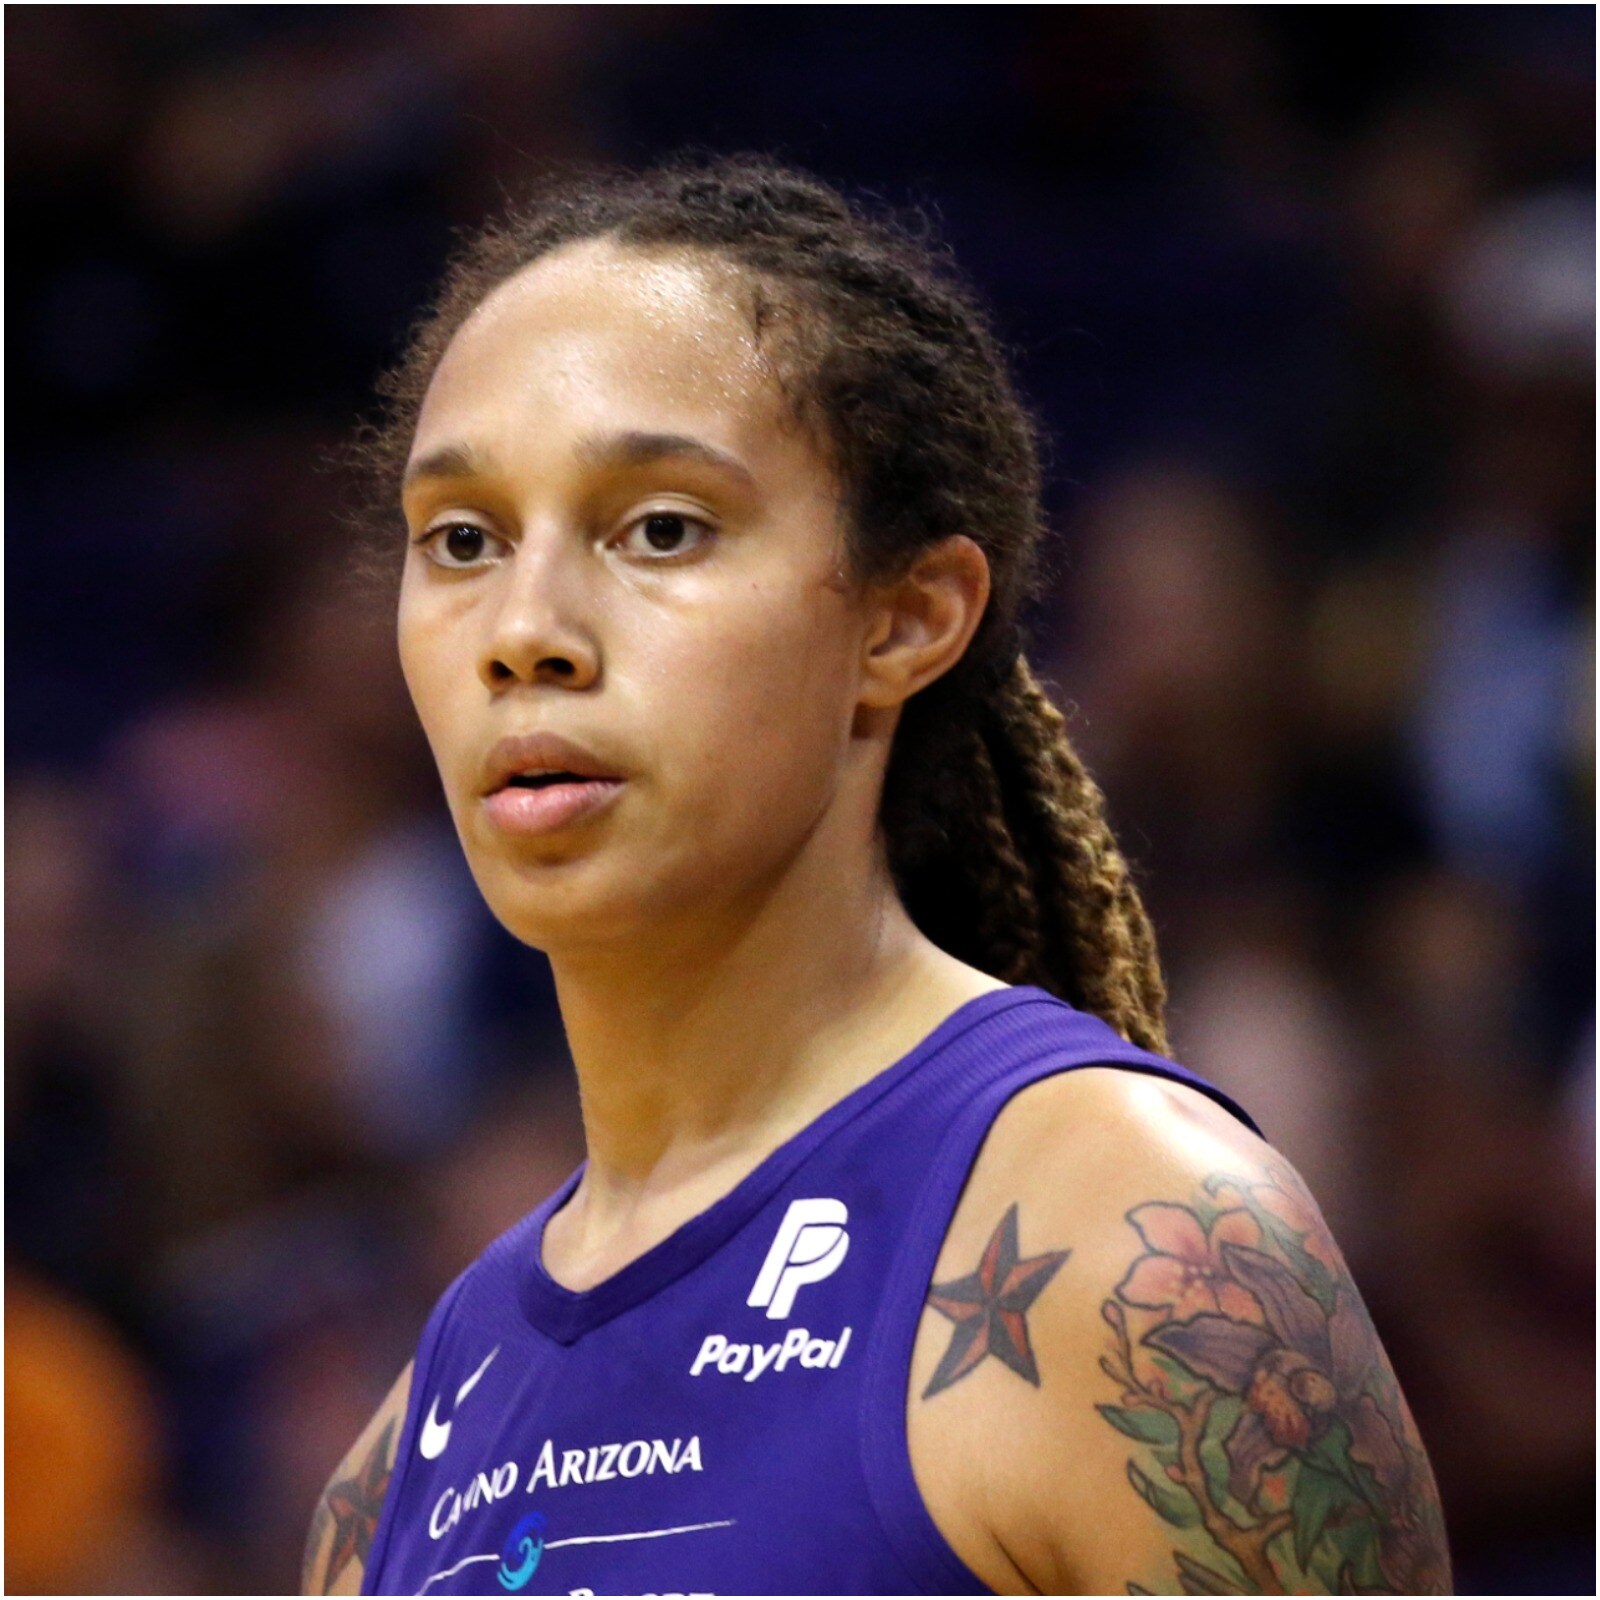 EXPLAINED: Will a Russian Prisoner Exchange Impact WNBA Star Griner?